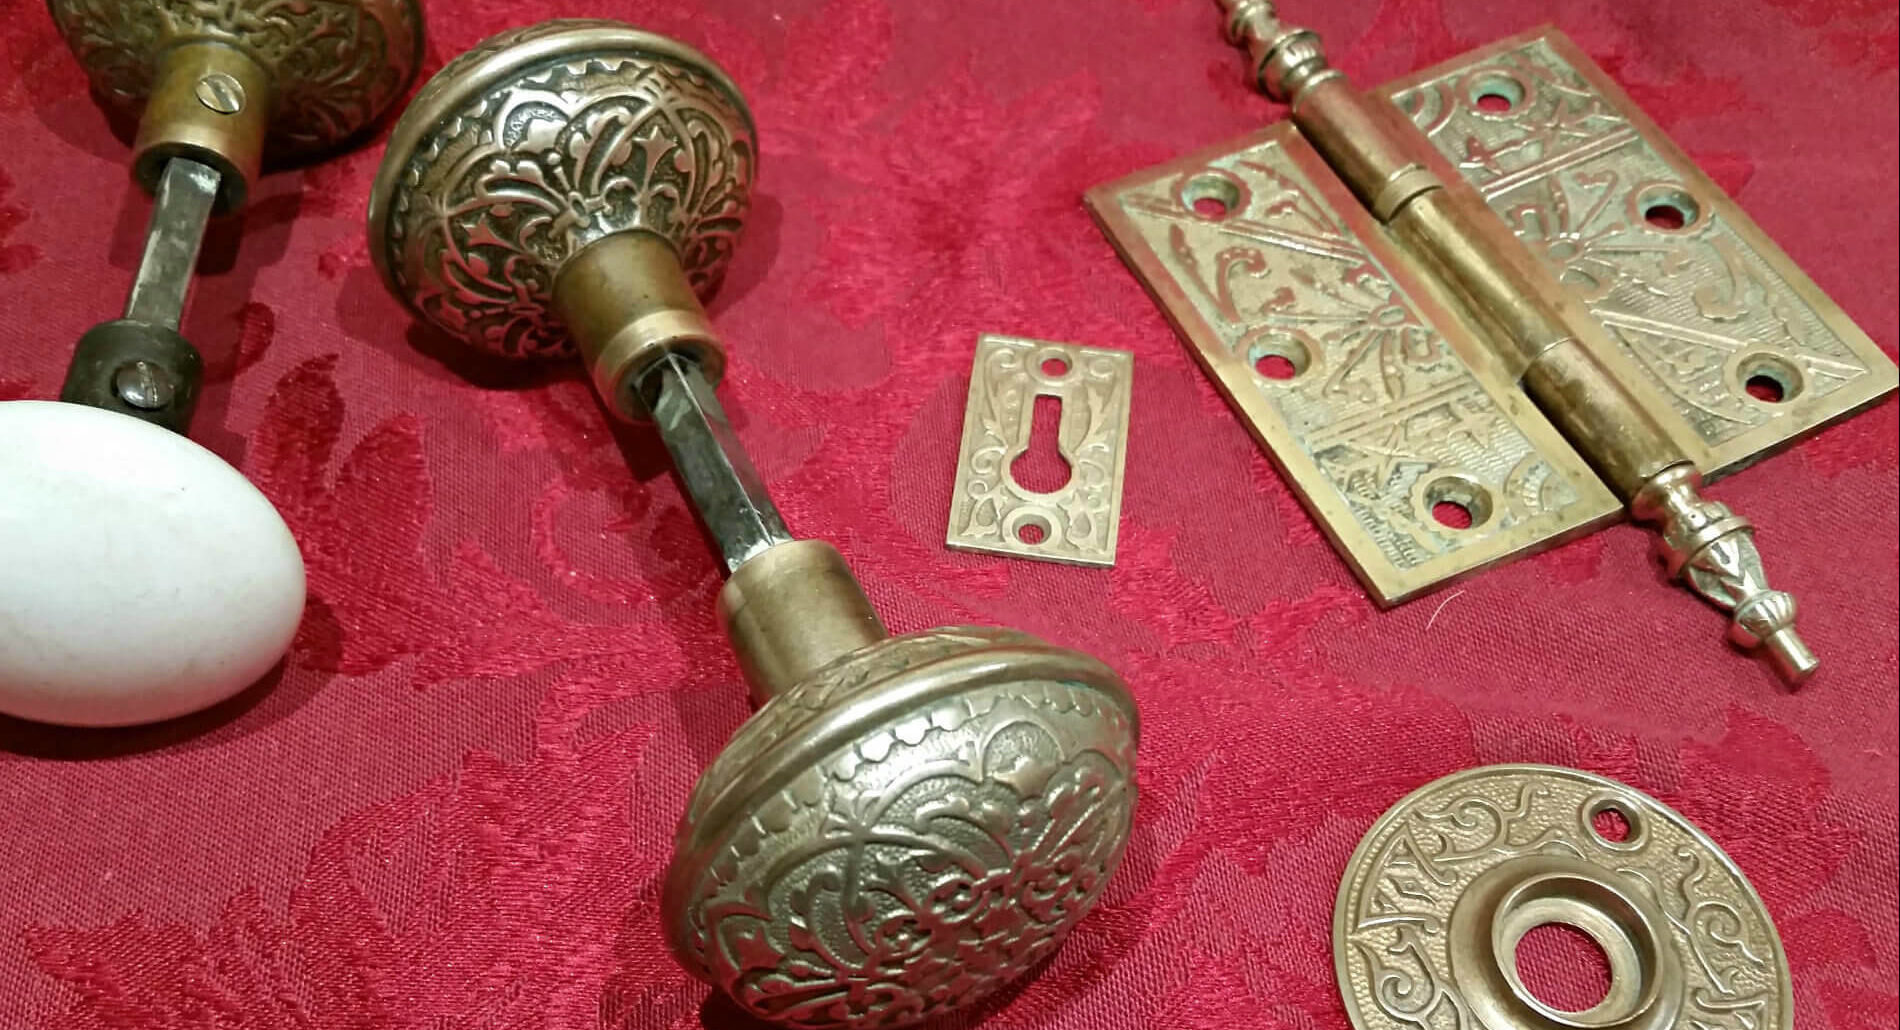 Gold vintage pieces to a door displayed including two doorknobs and a door hinge against a red table cloth